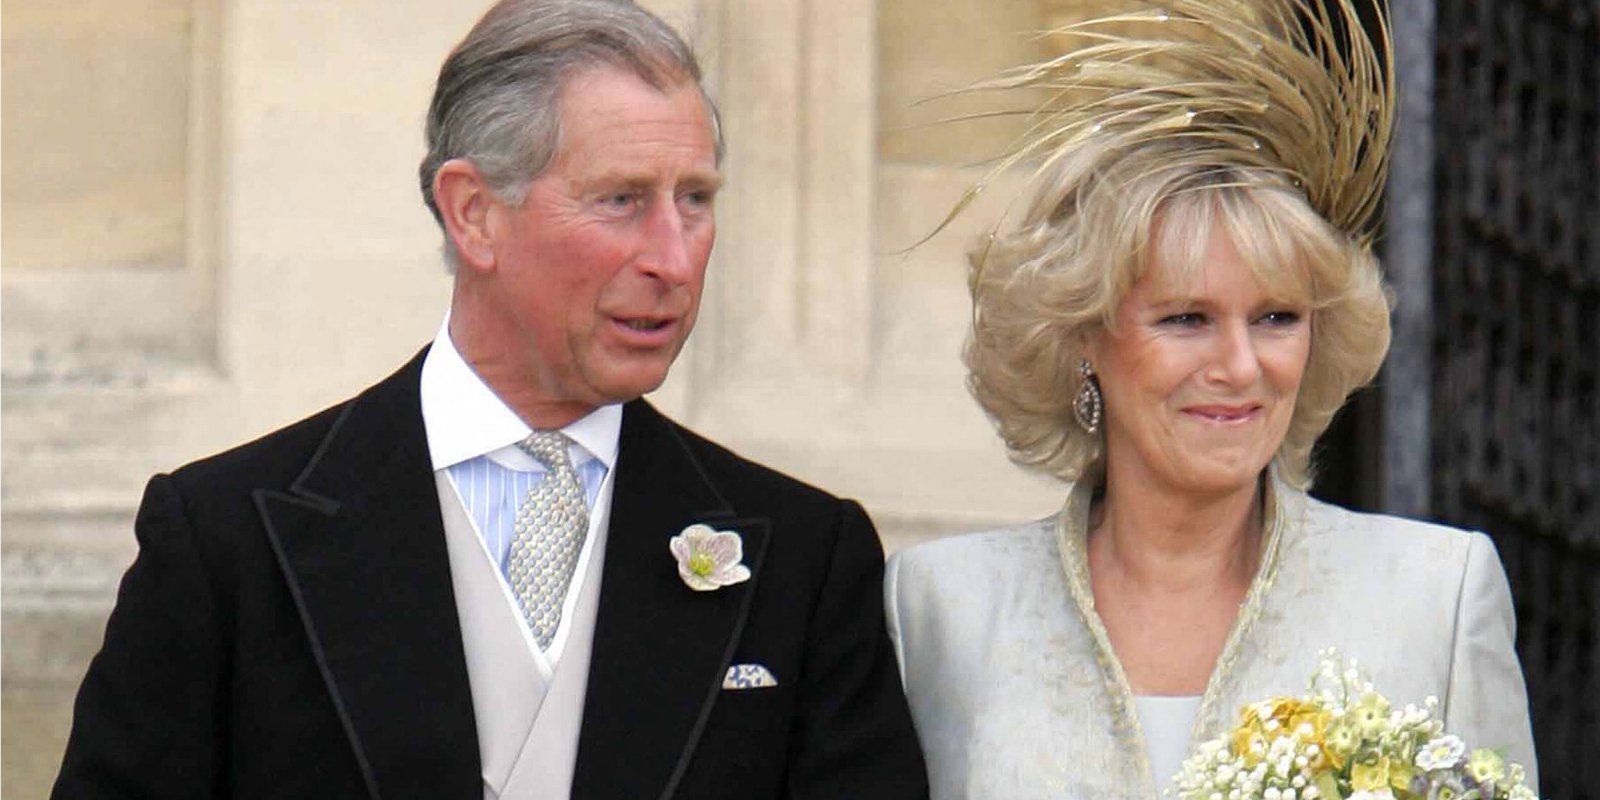 King Charles III and Camilla Parker Bowles on their 2005 wedding day.